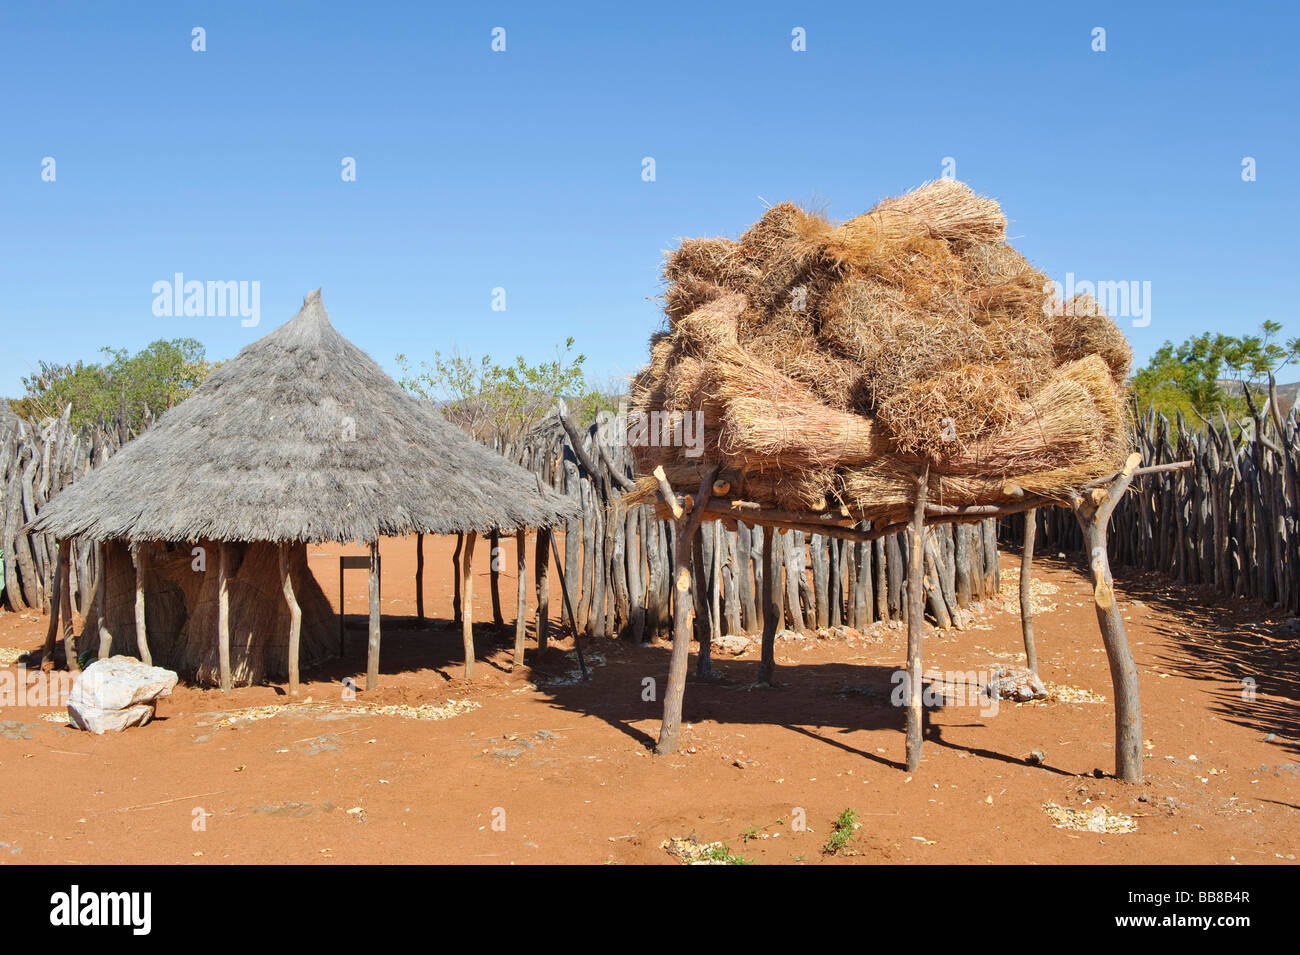 Straw storage of the Ovambo people in an open air museum, Cultural Village, Tsumeb, Namibia, Africa Stock Photo